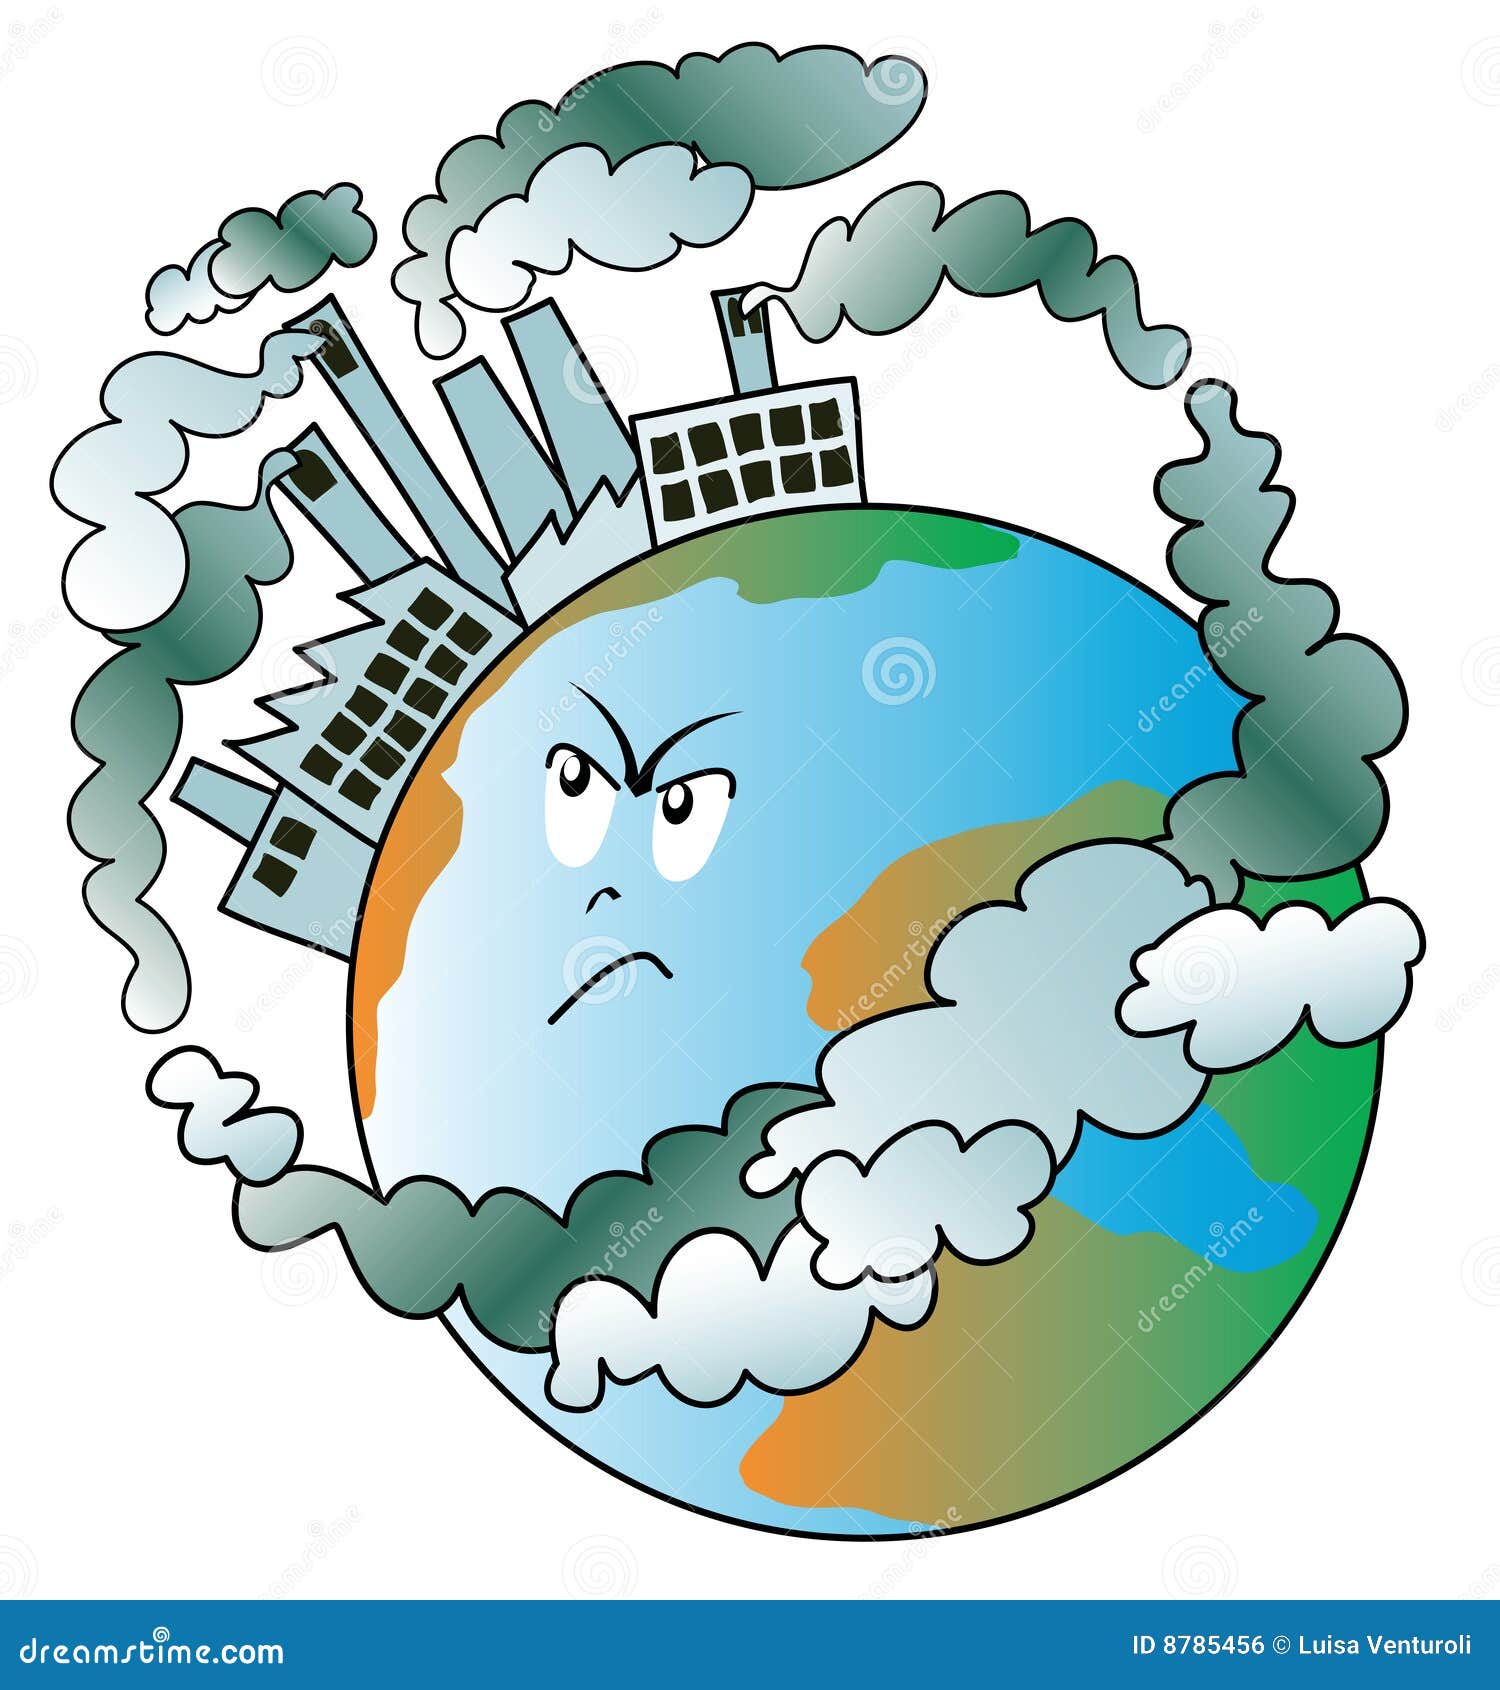 industrial pollution clipart - photo #14